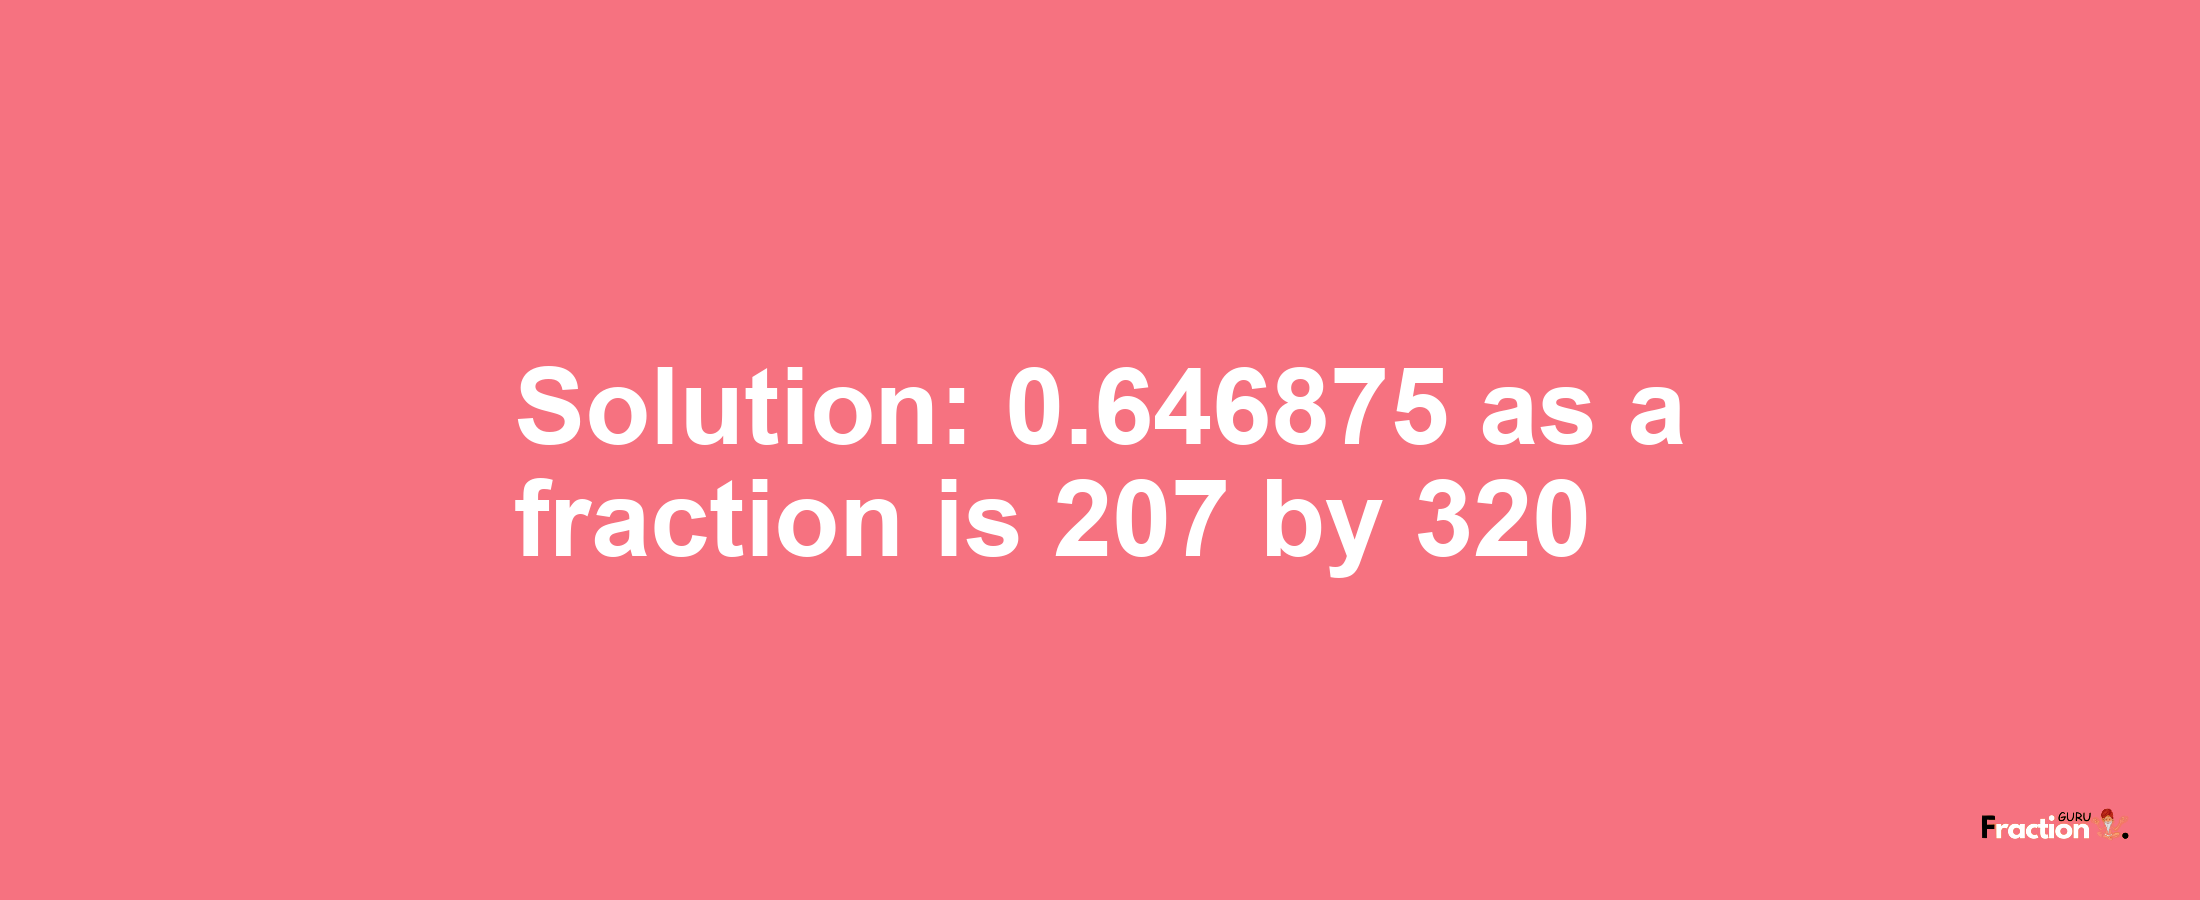 Solution:0.646875 as a fraction is 207/320